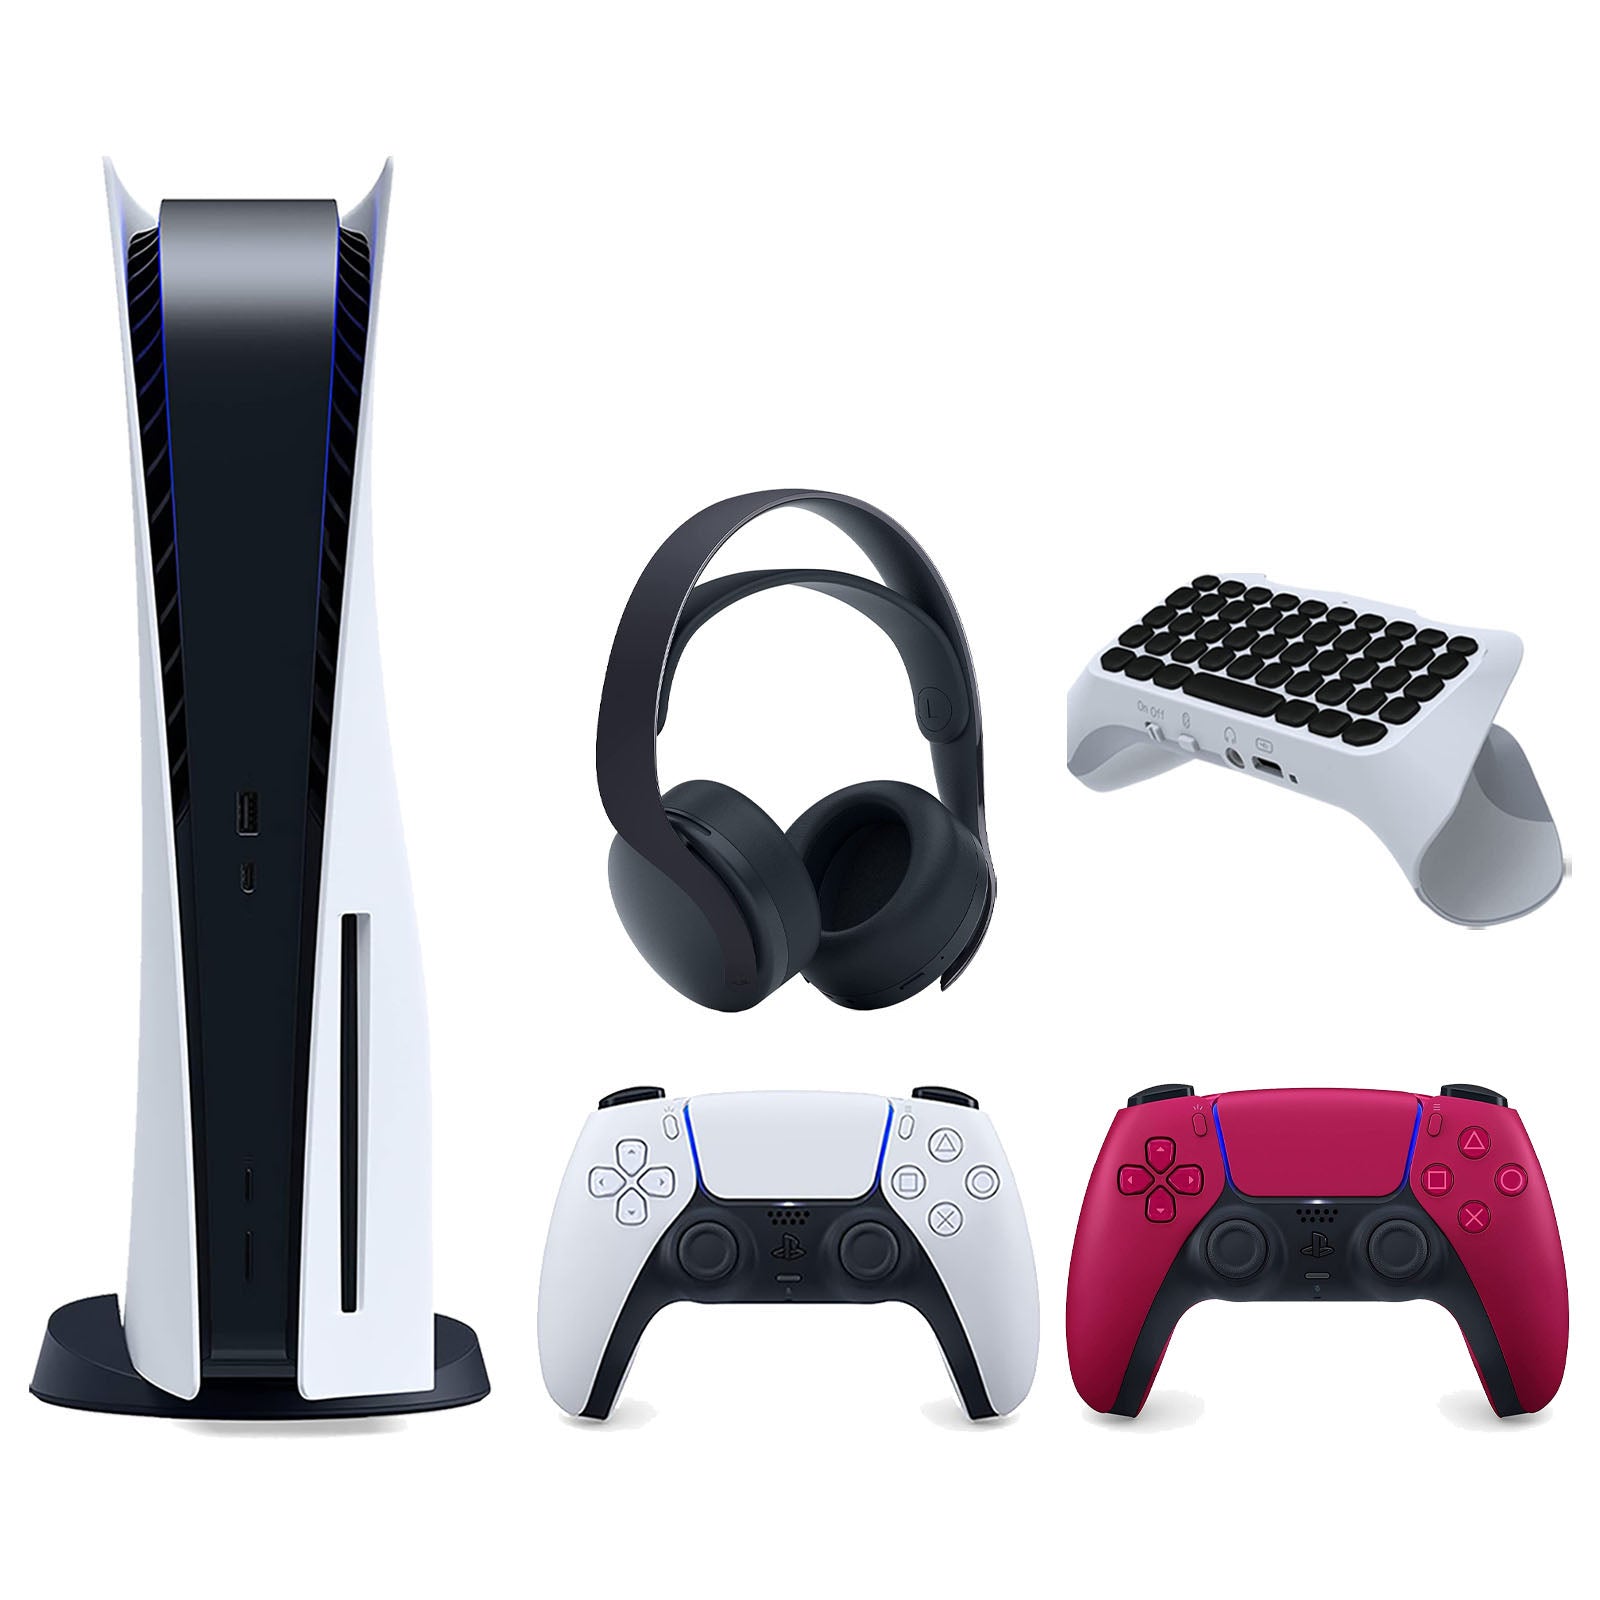 Sony Playstation 5 Disc Version Console with Extra Red Controller, Black PULSE 3D Headset and Surge QuickType 2.0 Wireless PS5 Controller Keypad Bundle - Pro-Distributing